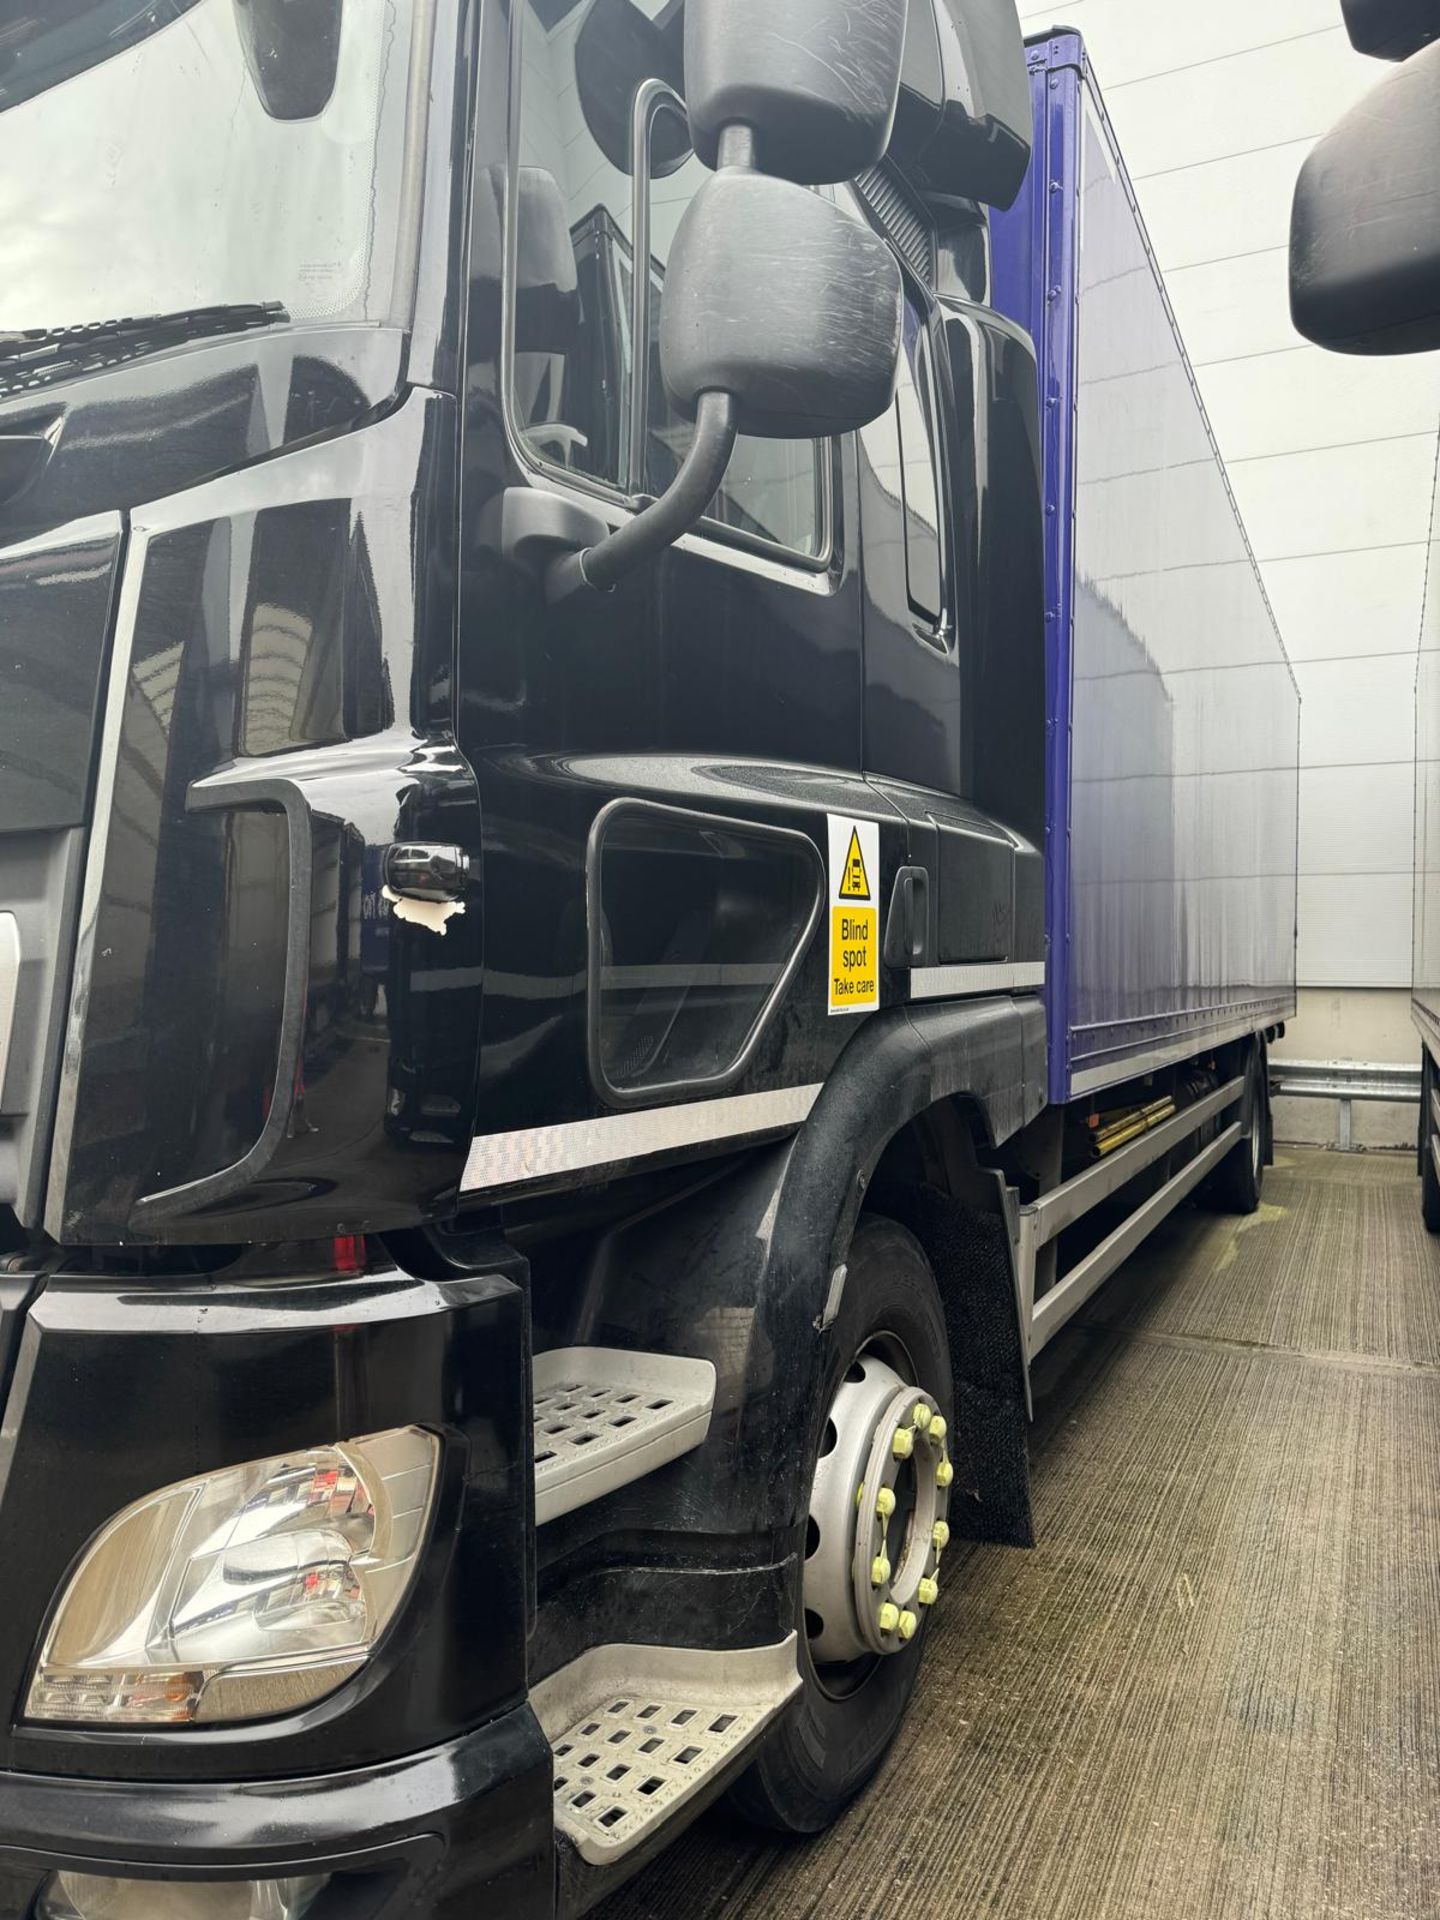 2019, DAF CF 260 FA (Ex-Fleet Owned & Maintained) - FN69 AXG (18 Ton Rigid Truck with Tail Lift) - Image 4 of 7